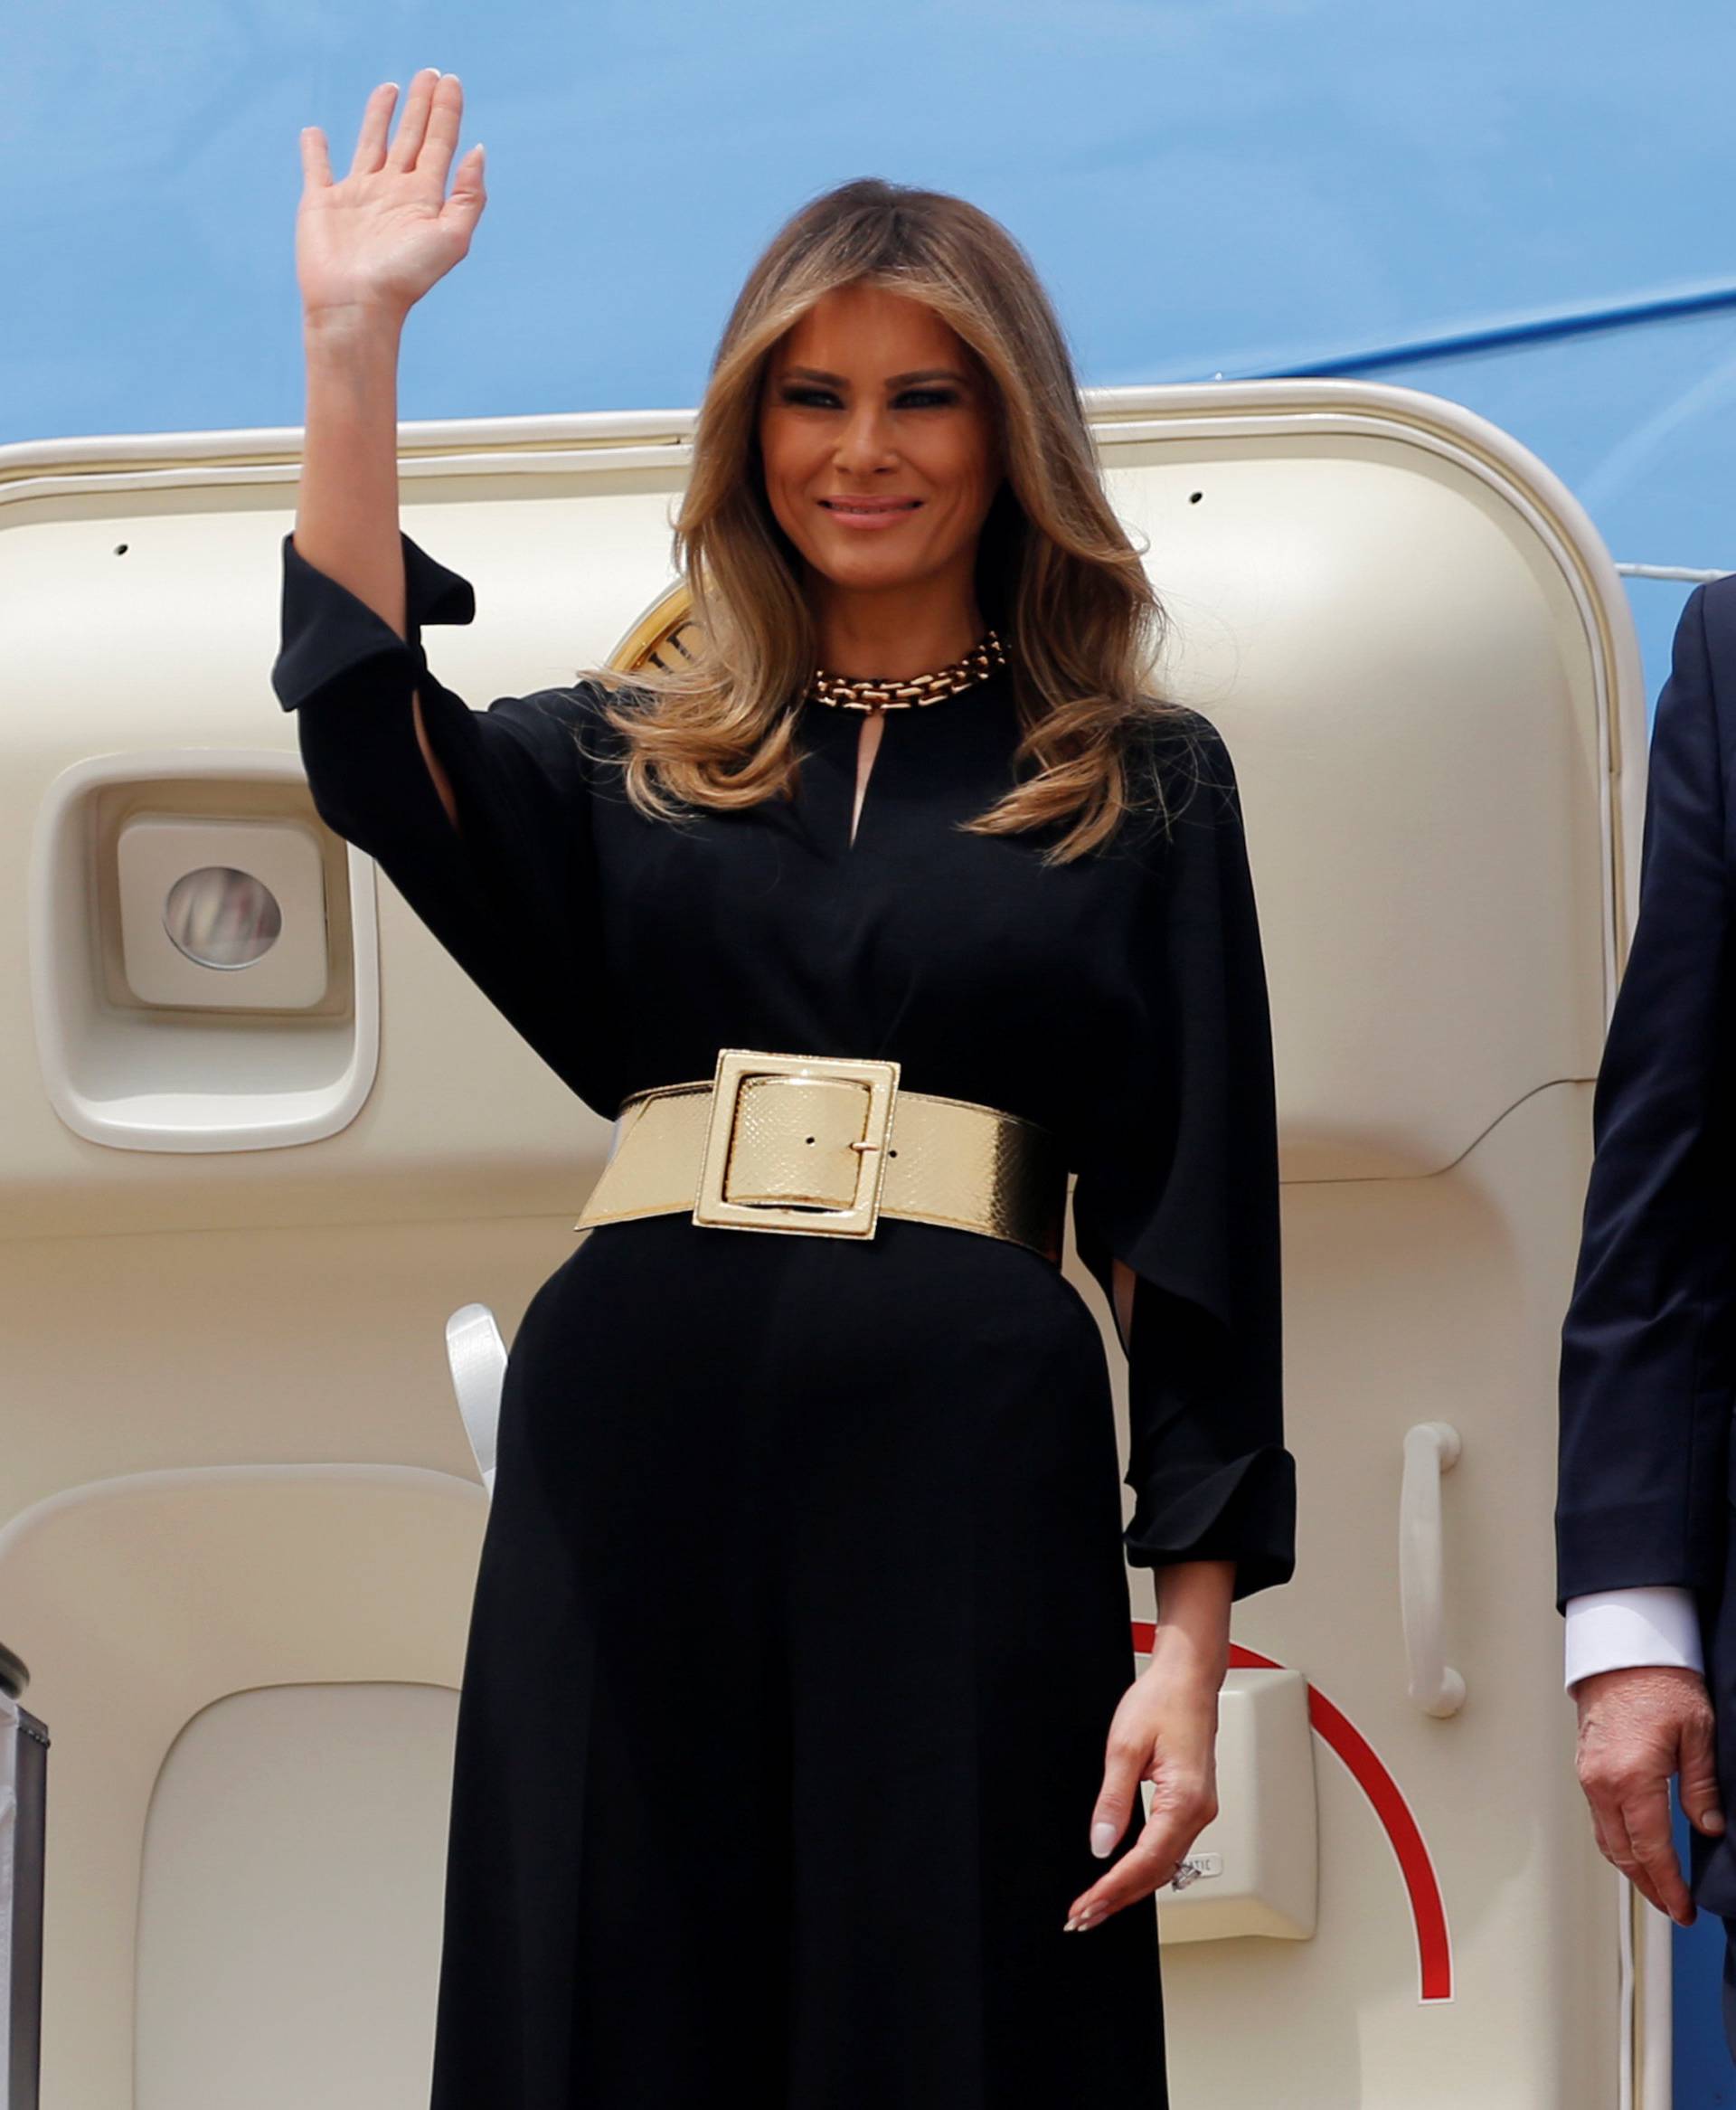 Trump and the first lady arrive aboard Air Force One at King Khalid Airport in Riyadh